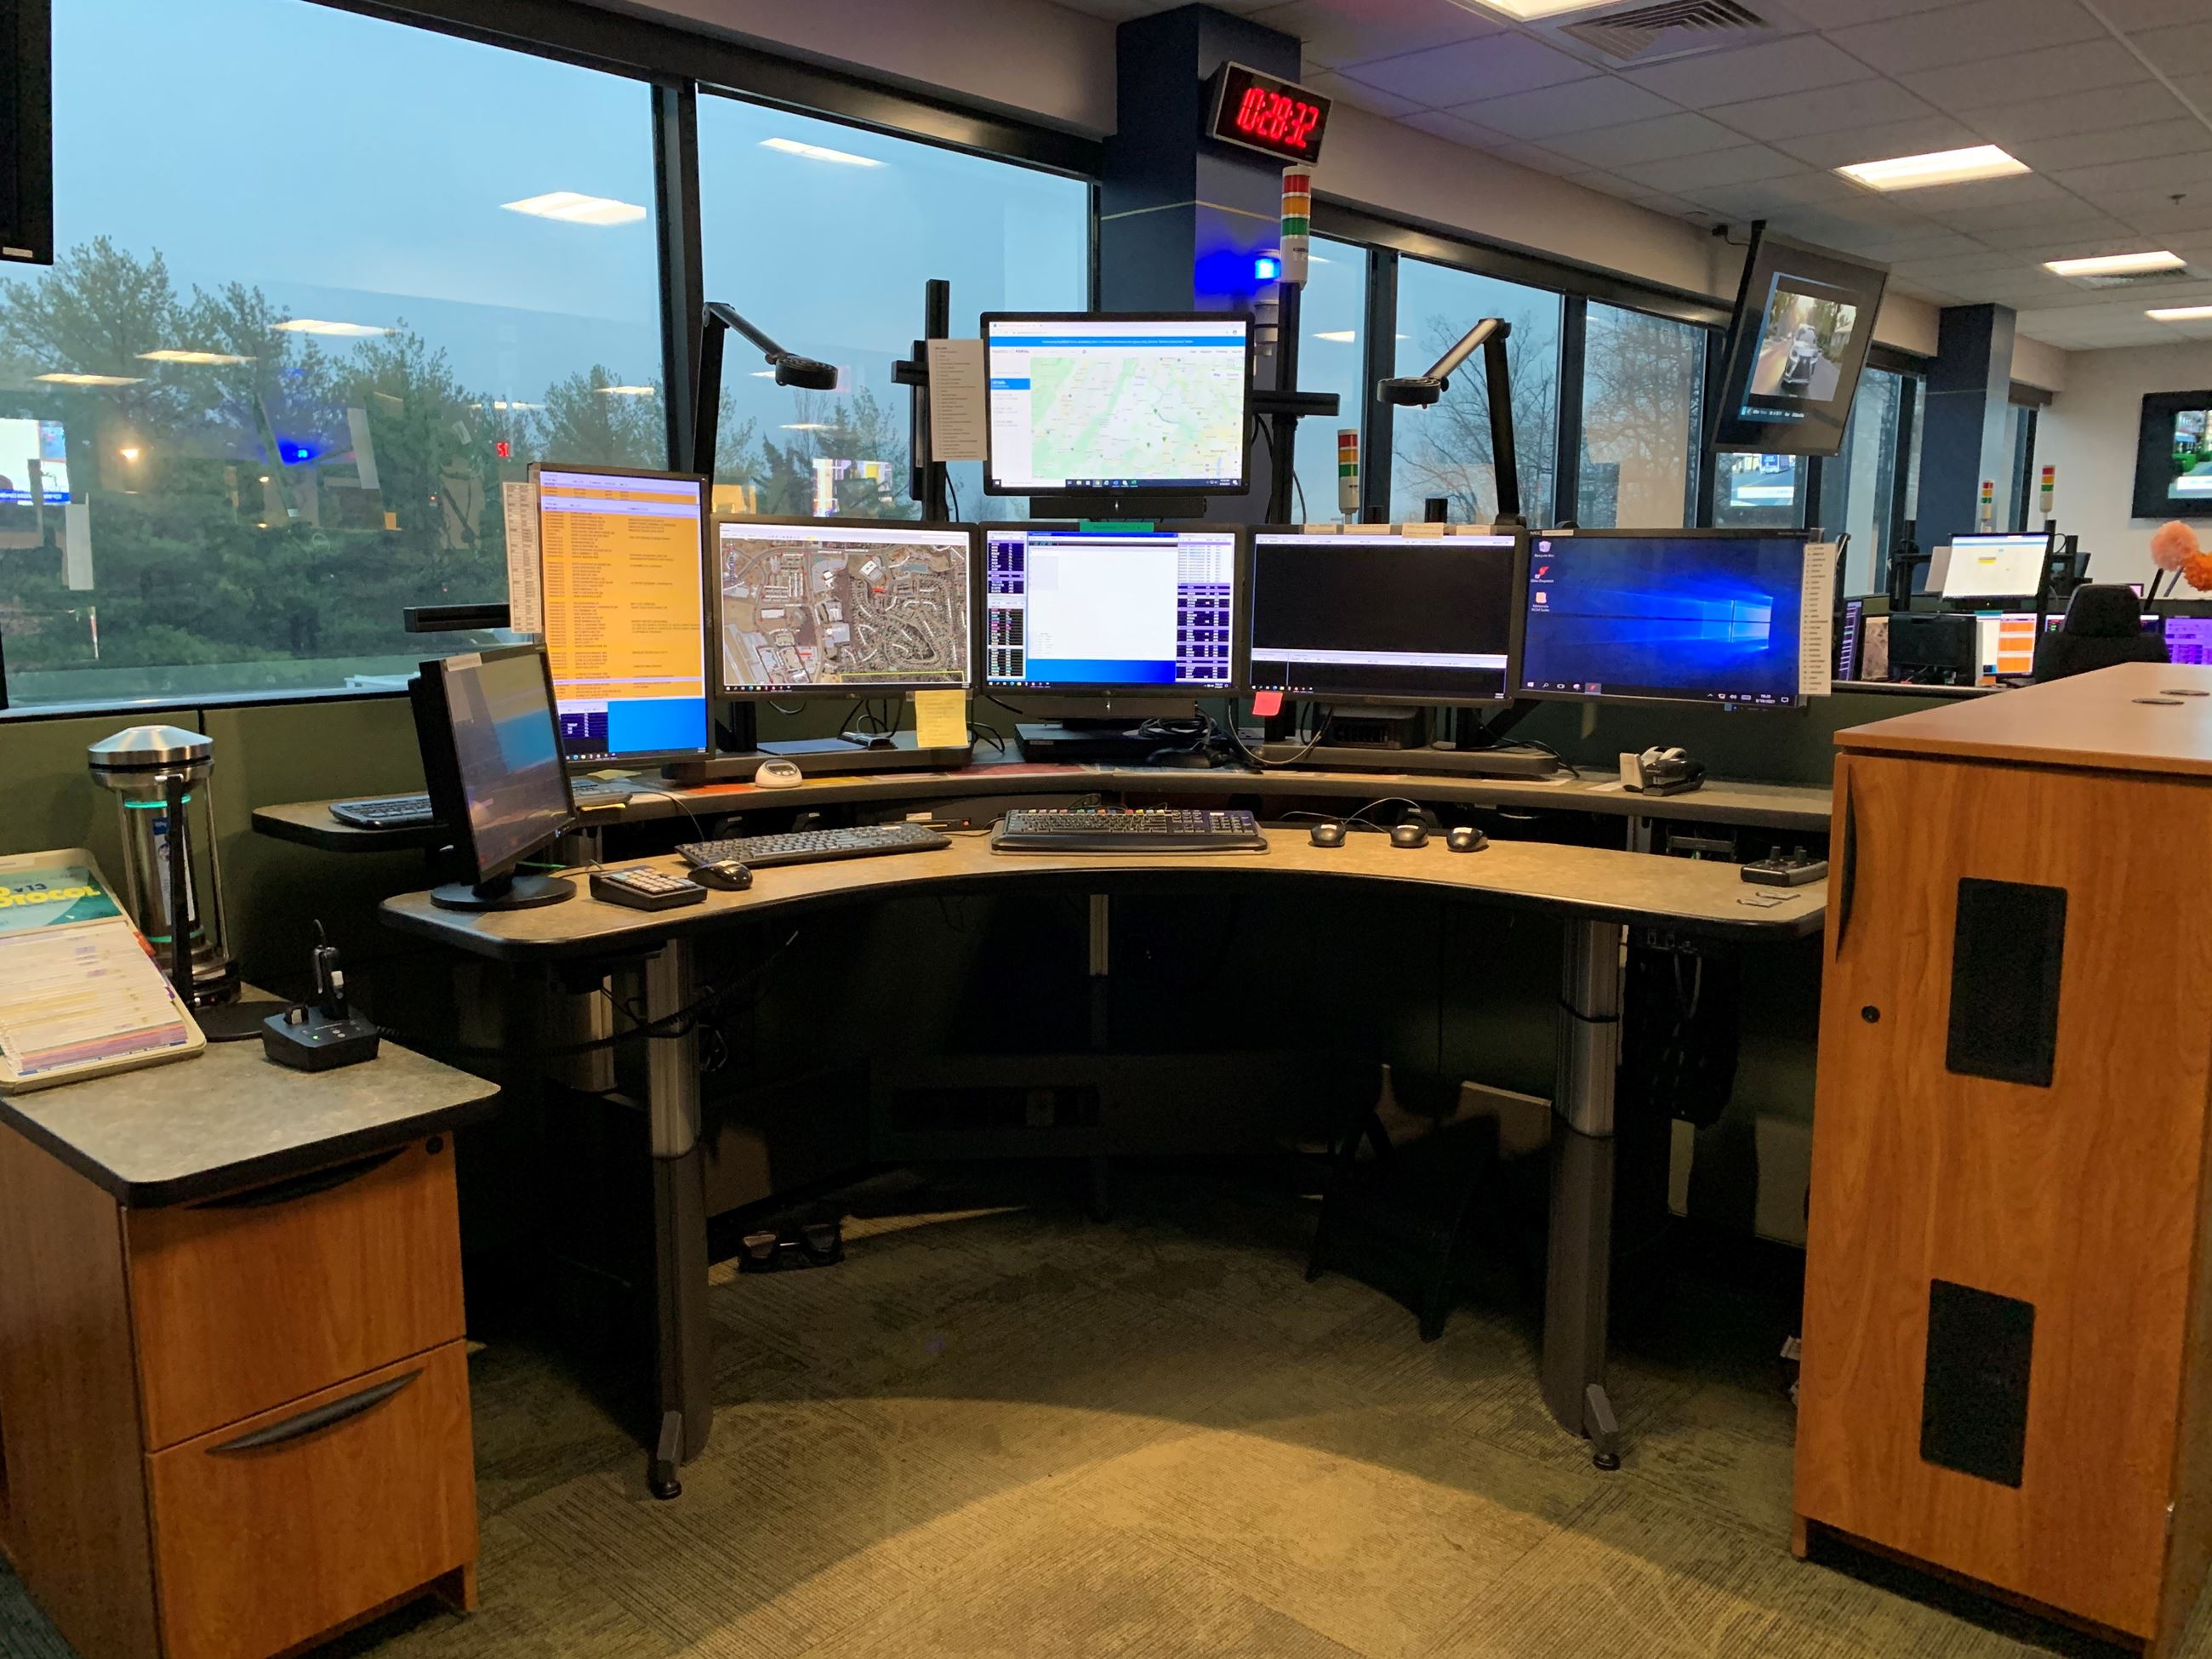 The LC-CFRS Emergency Communications Center